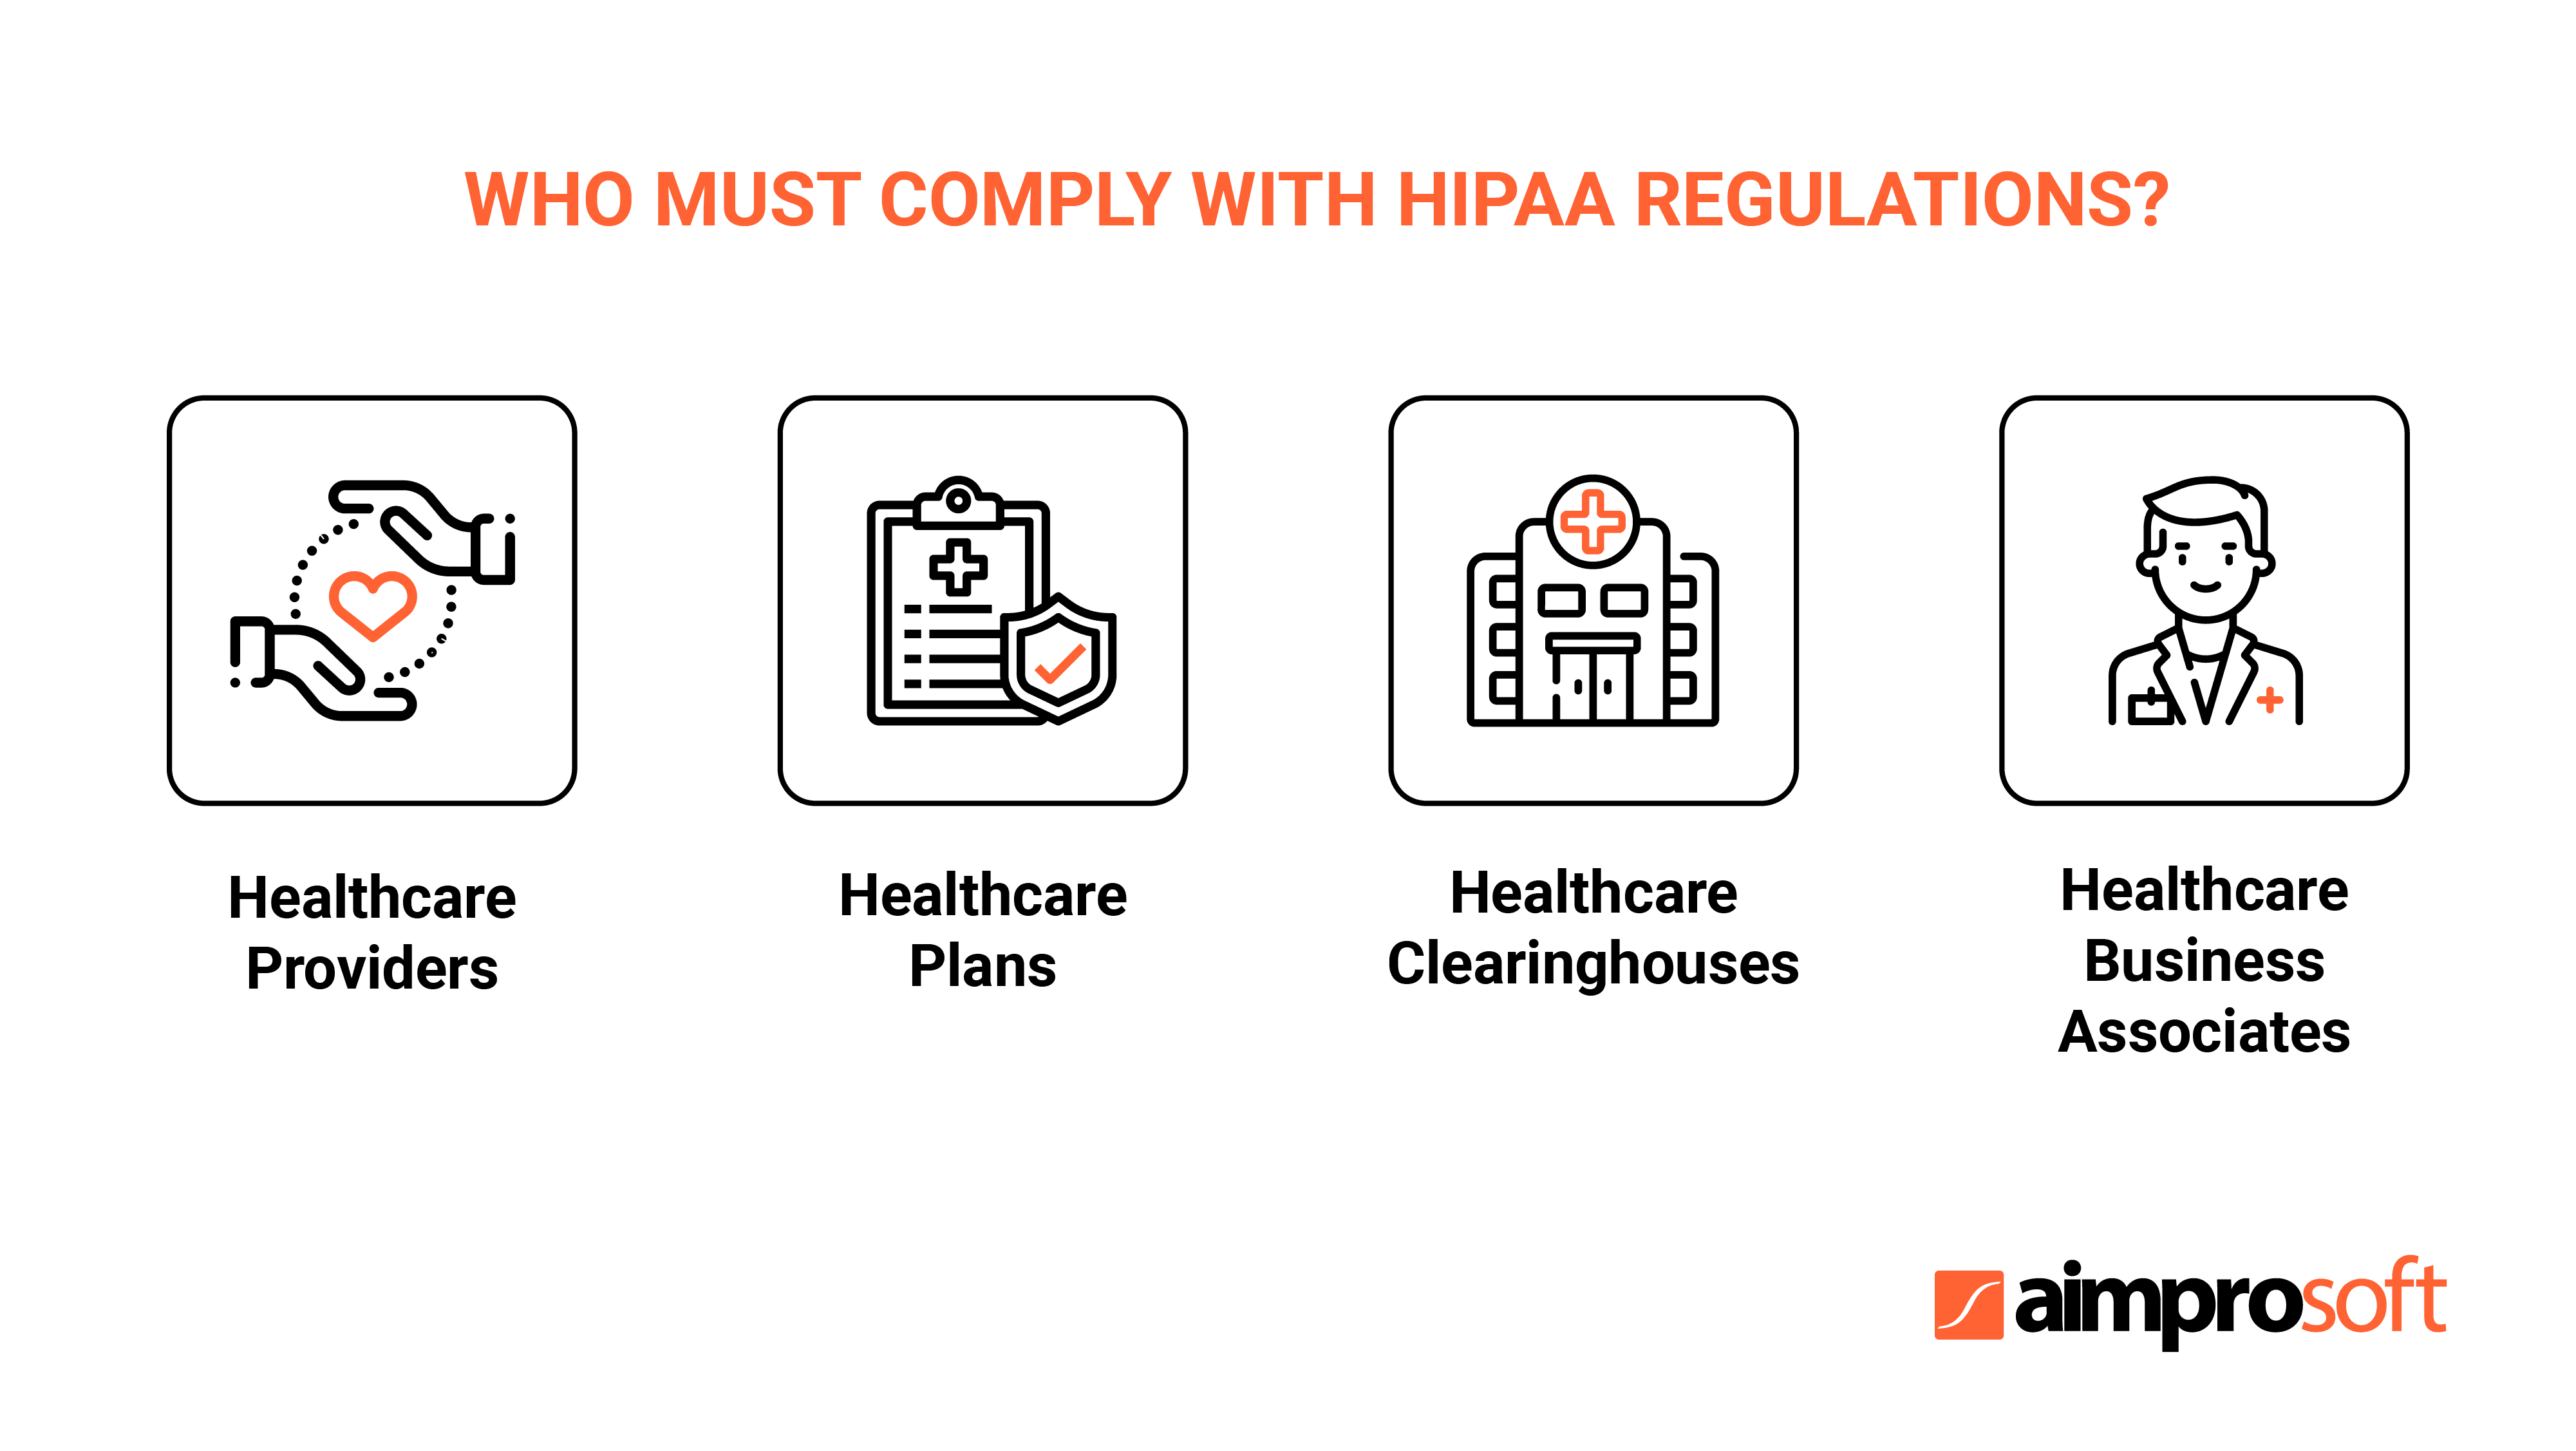 HIPAA compliant entities are divided into four categories